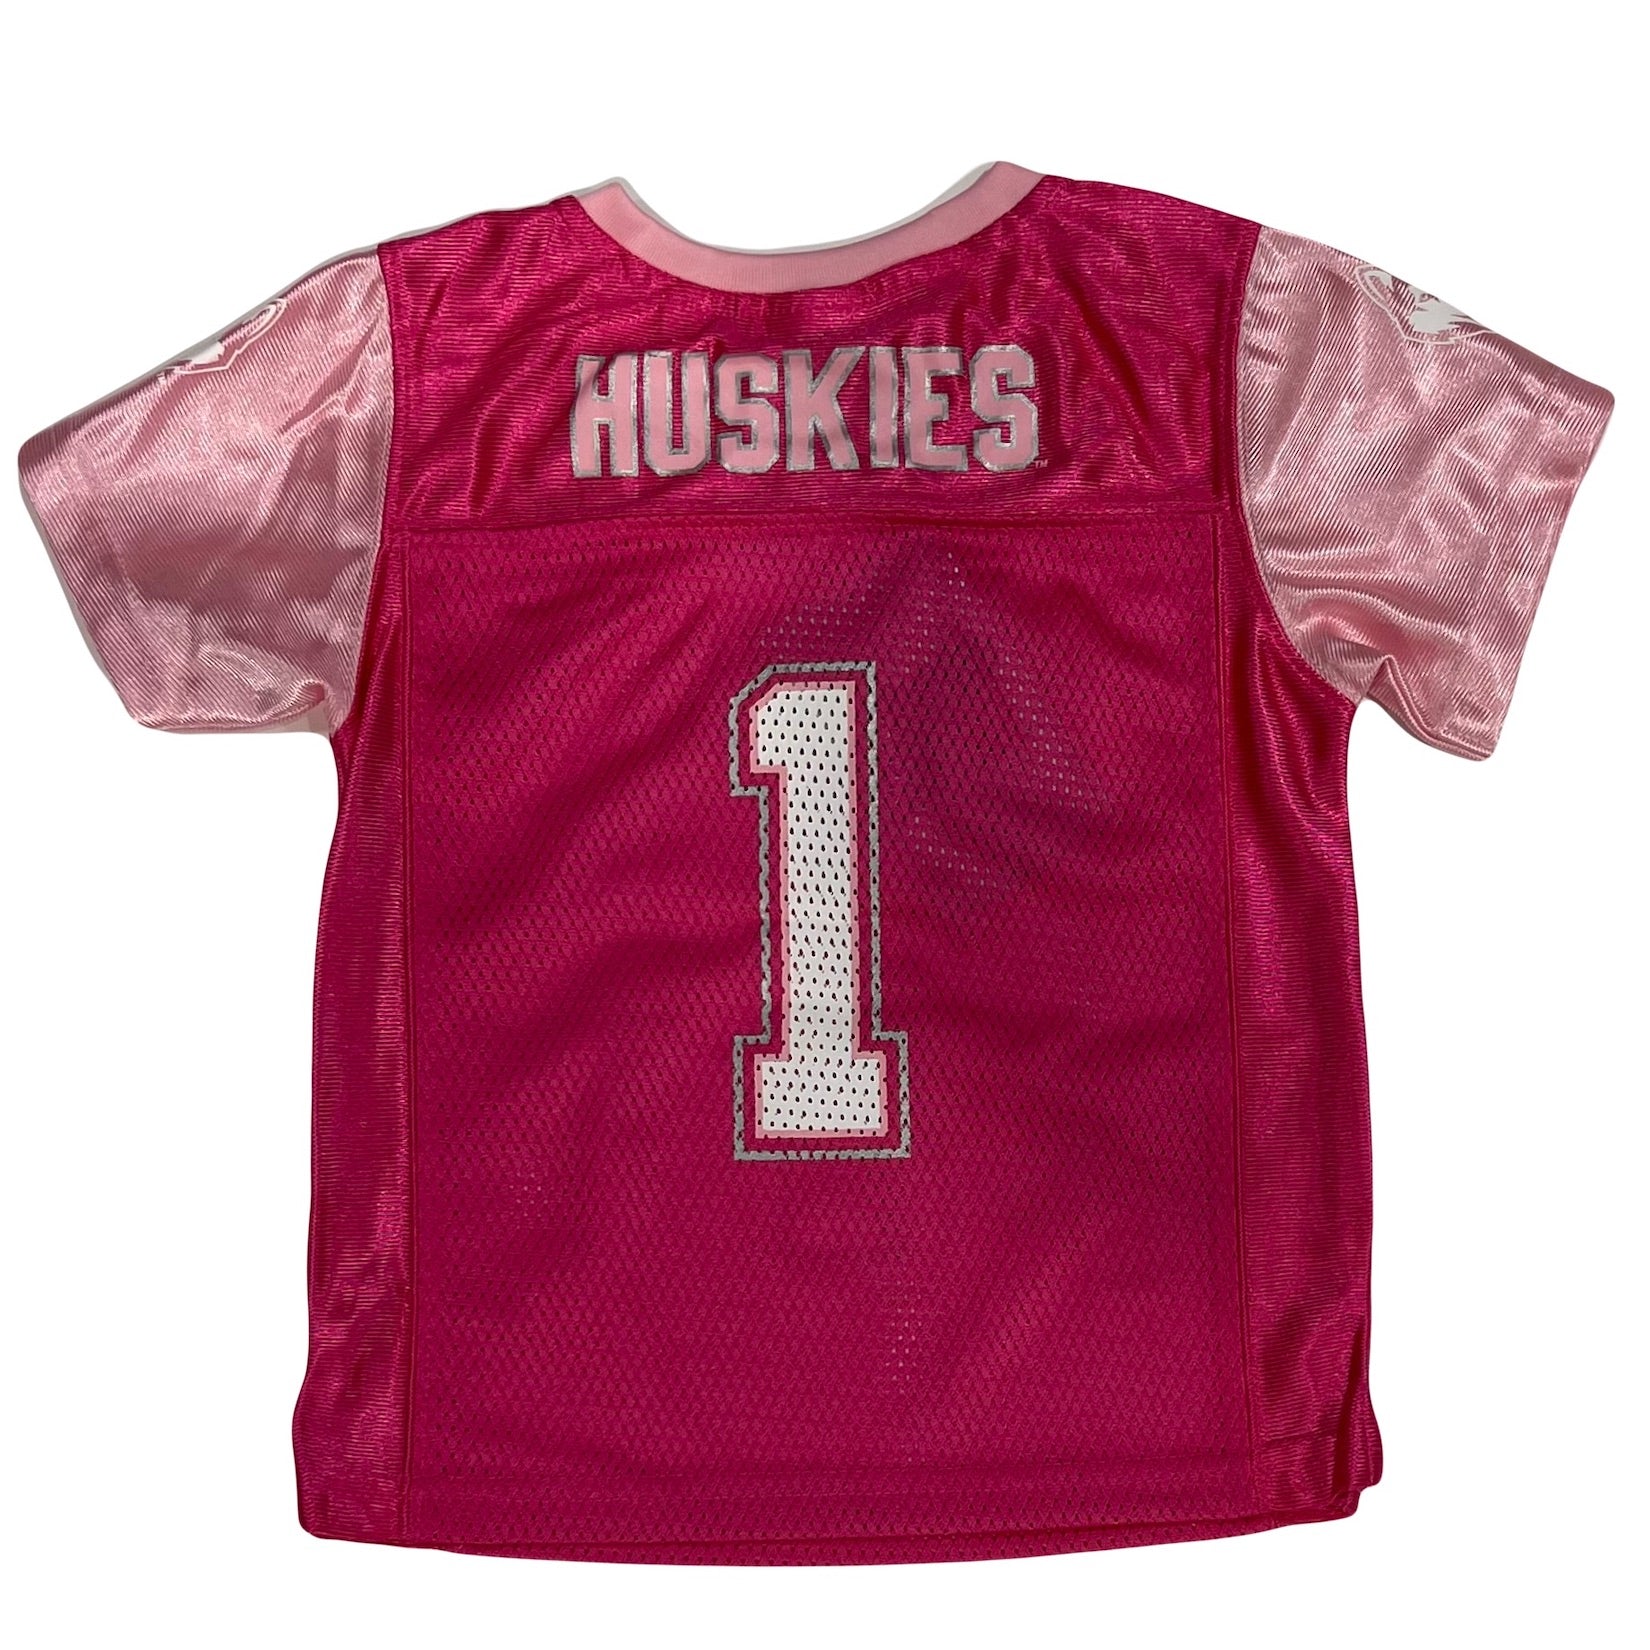 Tots Girl's Jersey